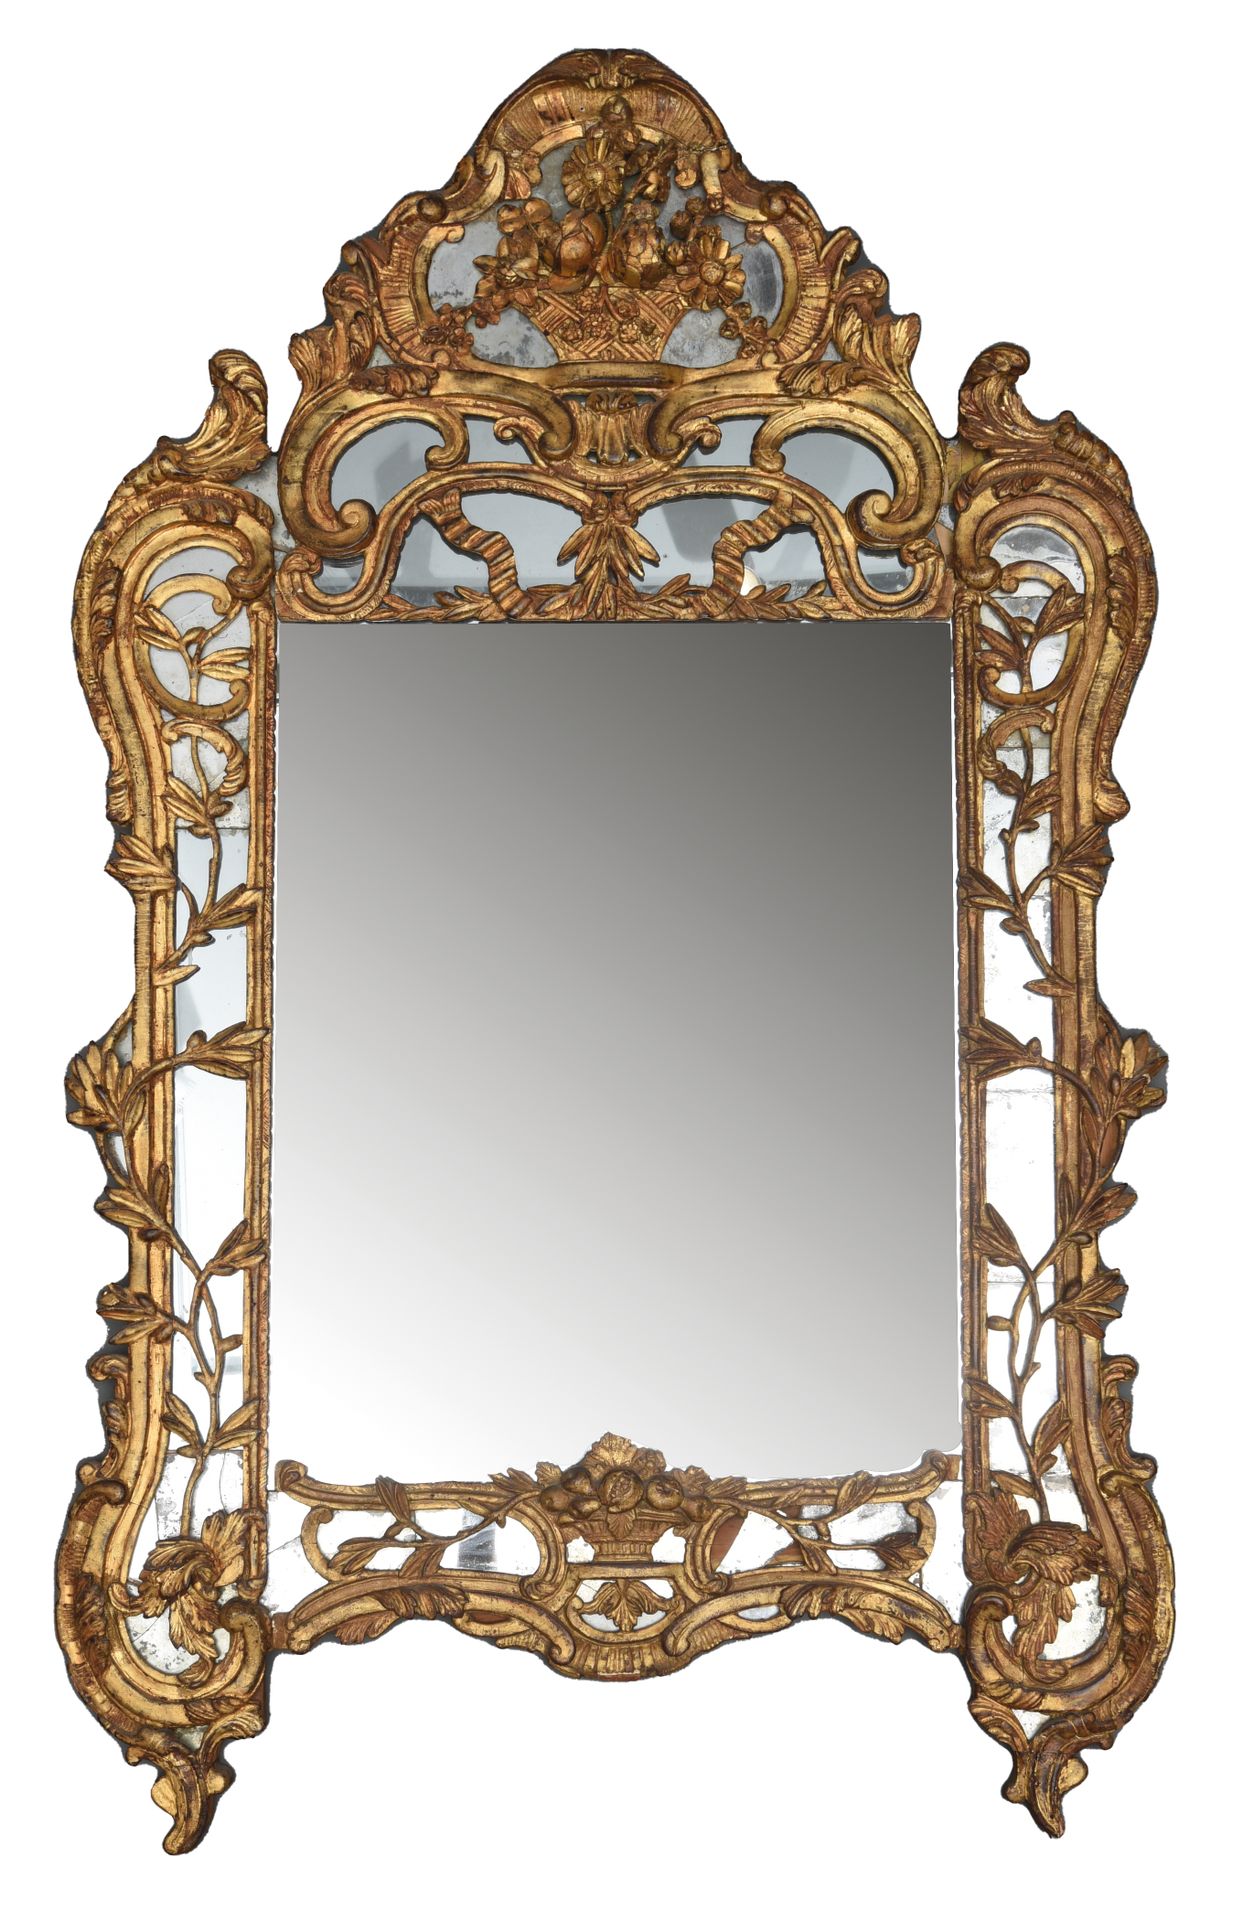 Null MIRROR

In a carved and gilded wood frame with reserves 

On the pediment a&hellip;